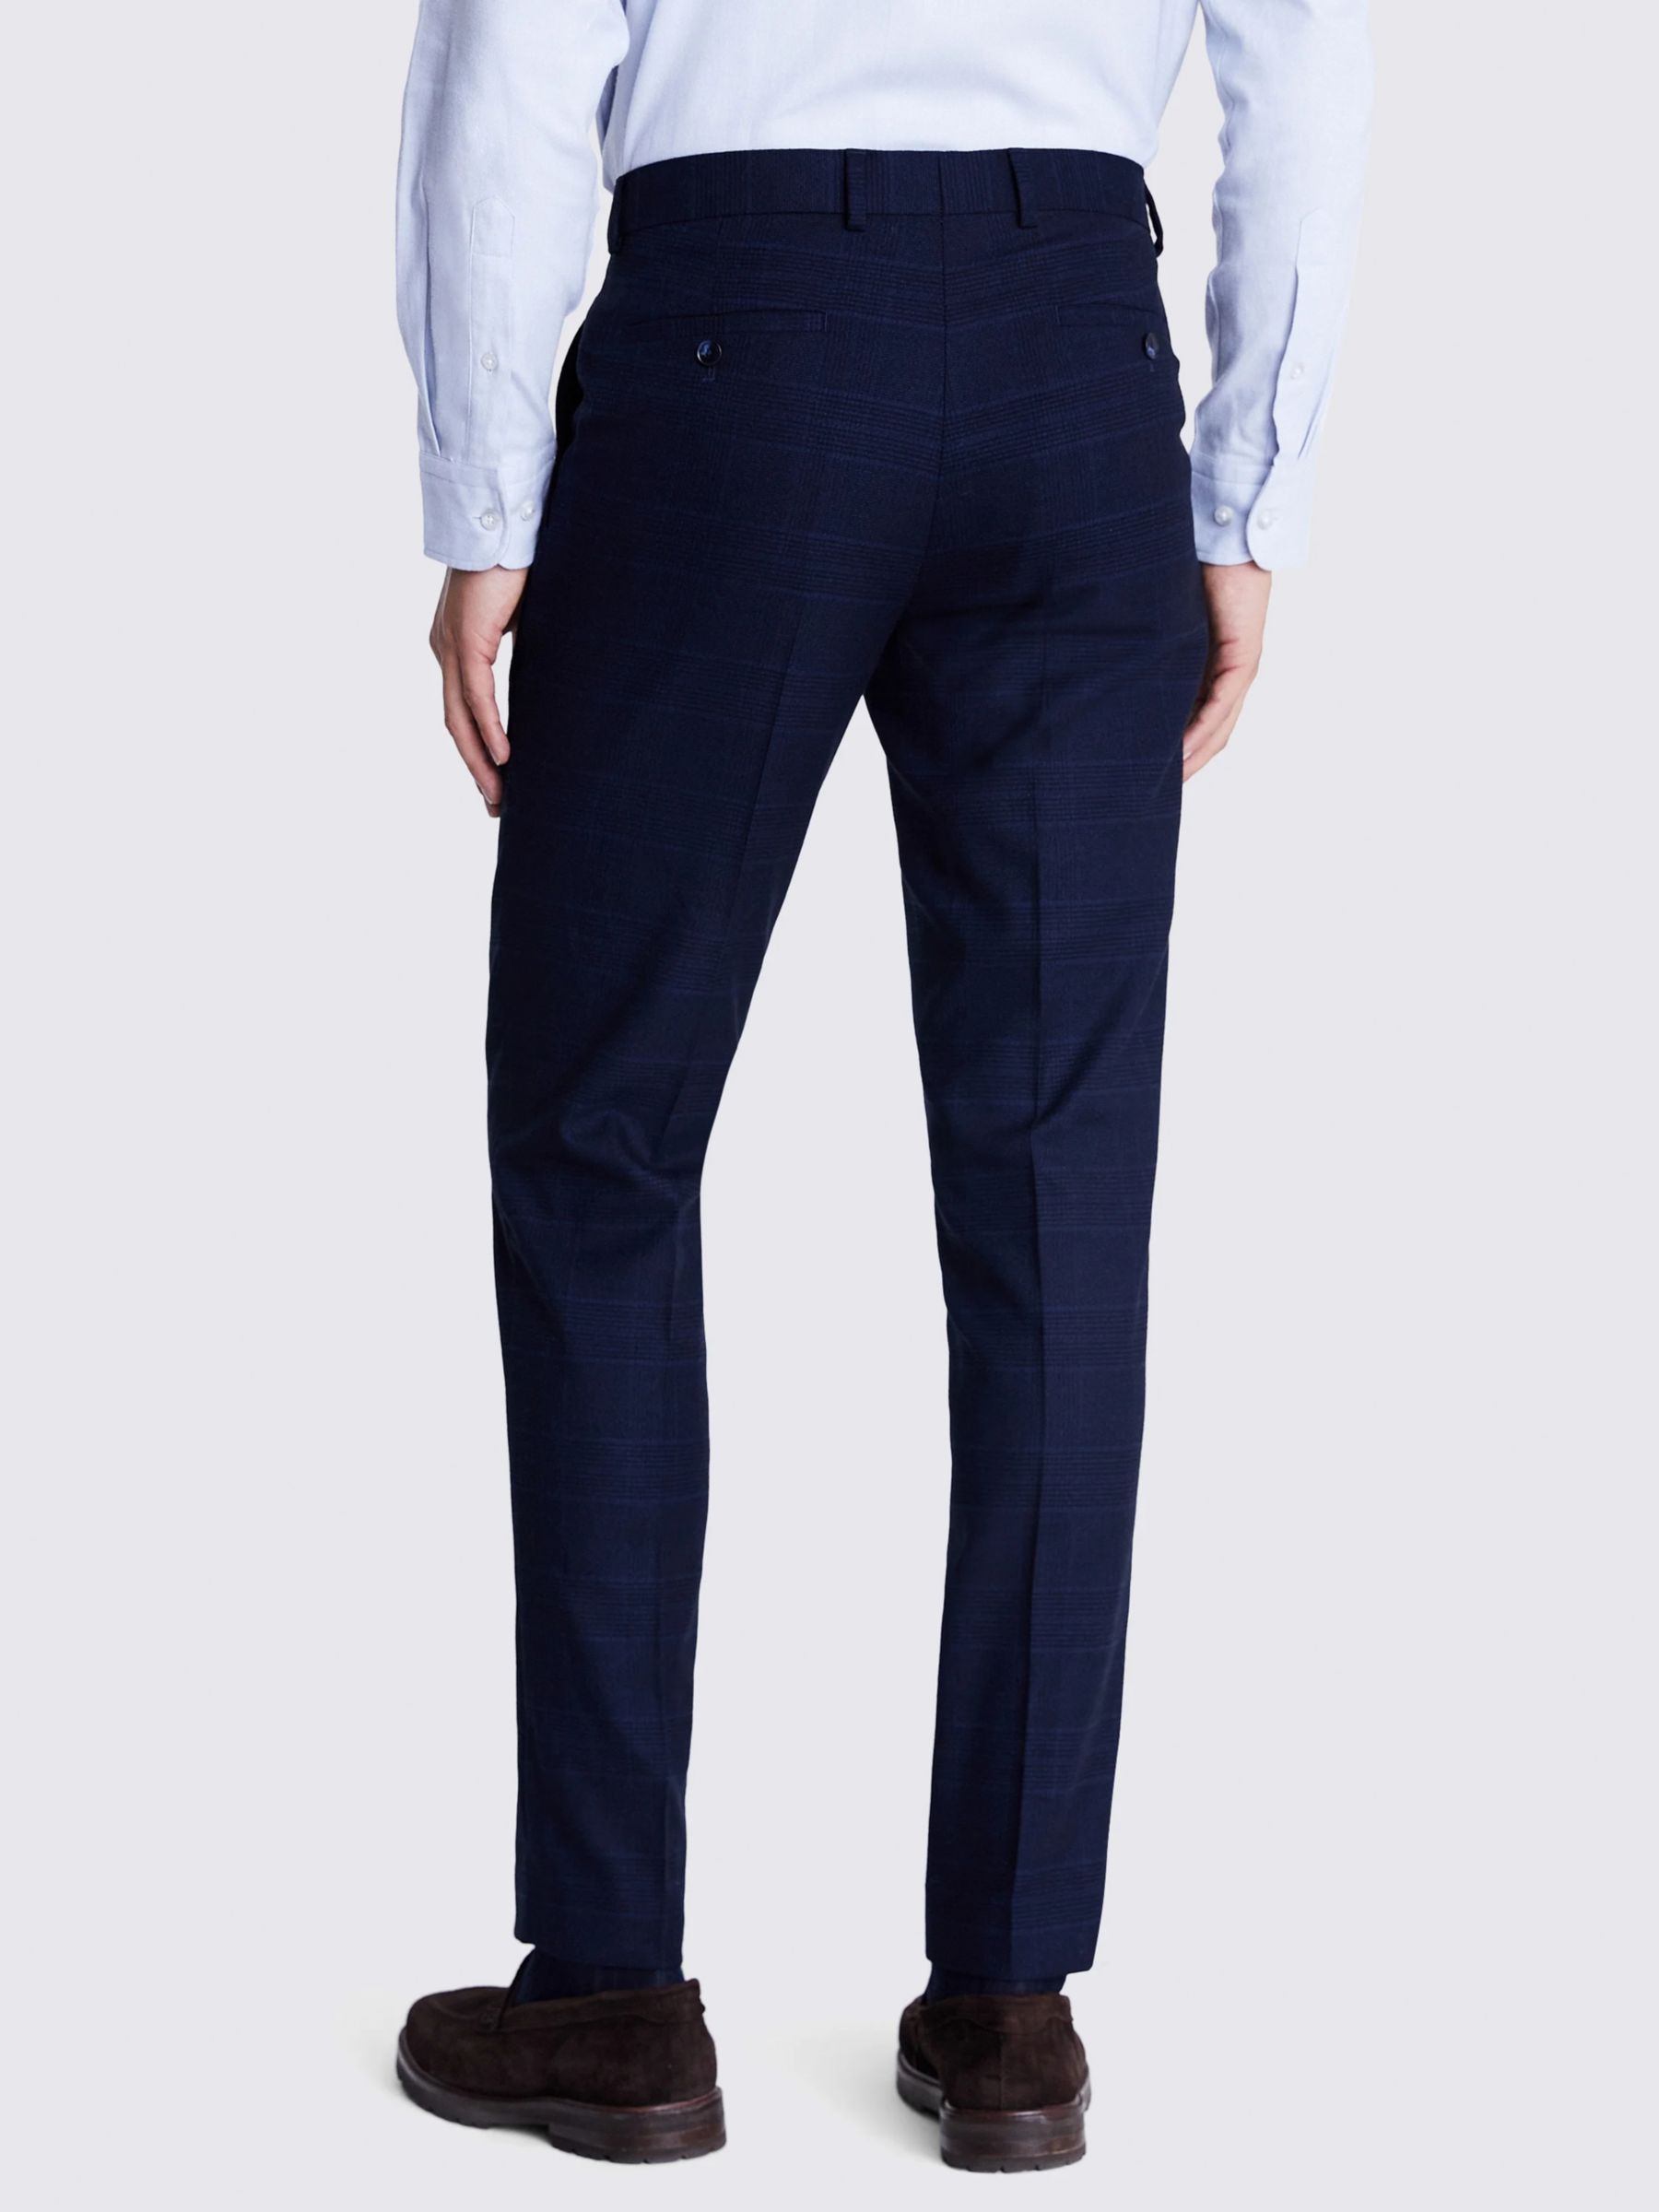 Moss Slim Fit Check Trousers, Ink, 36R